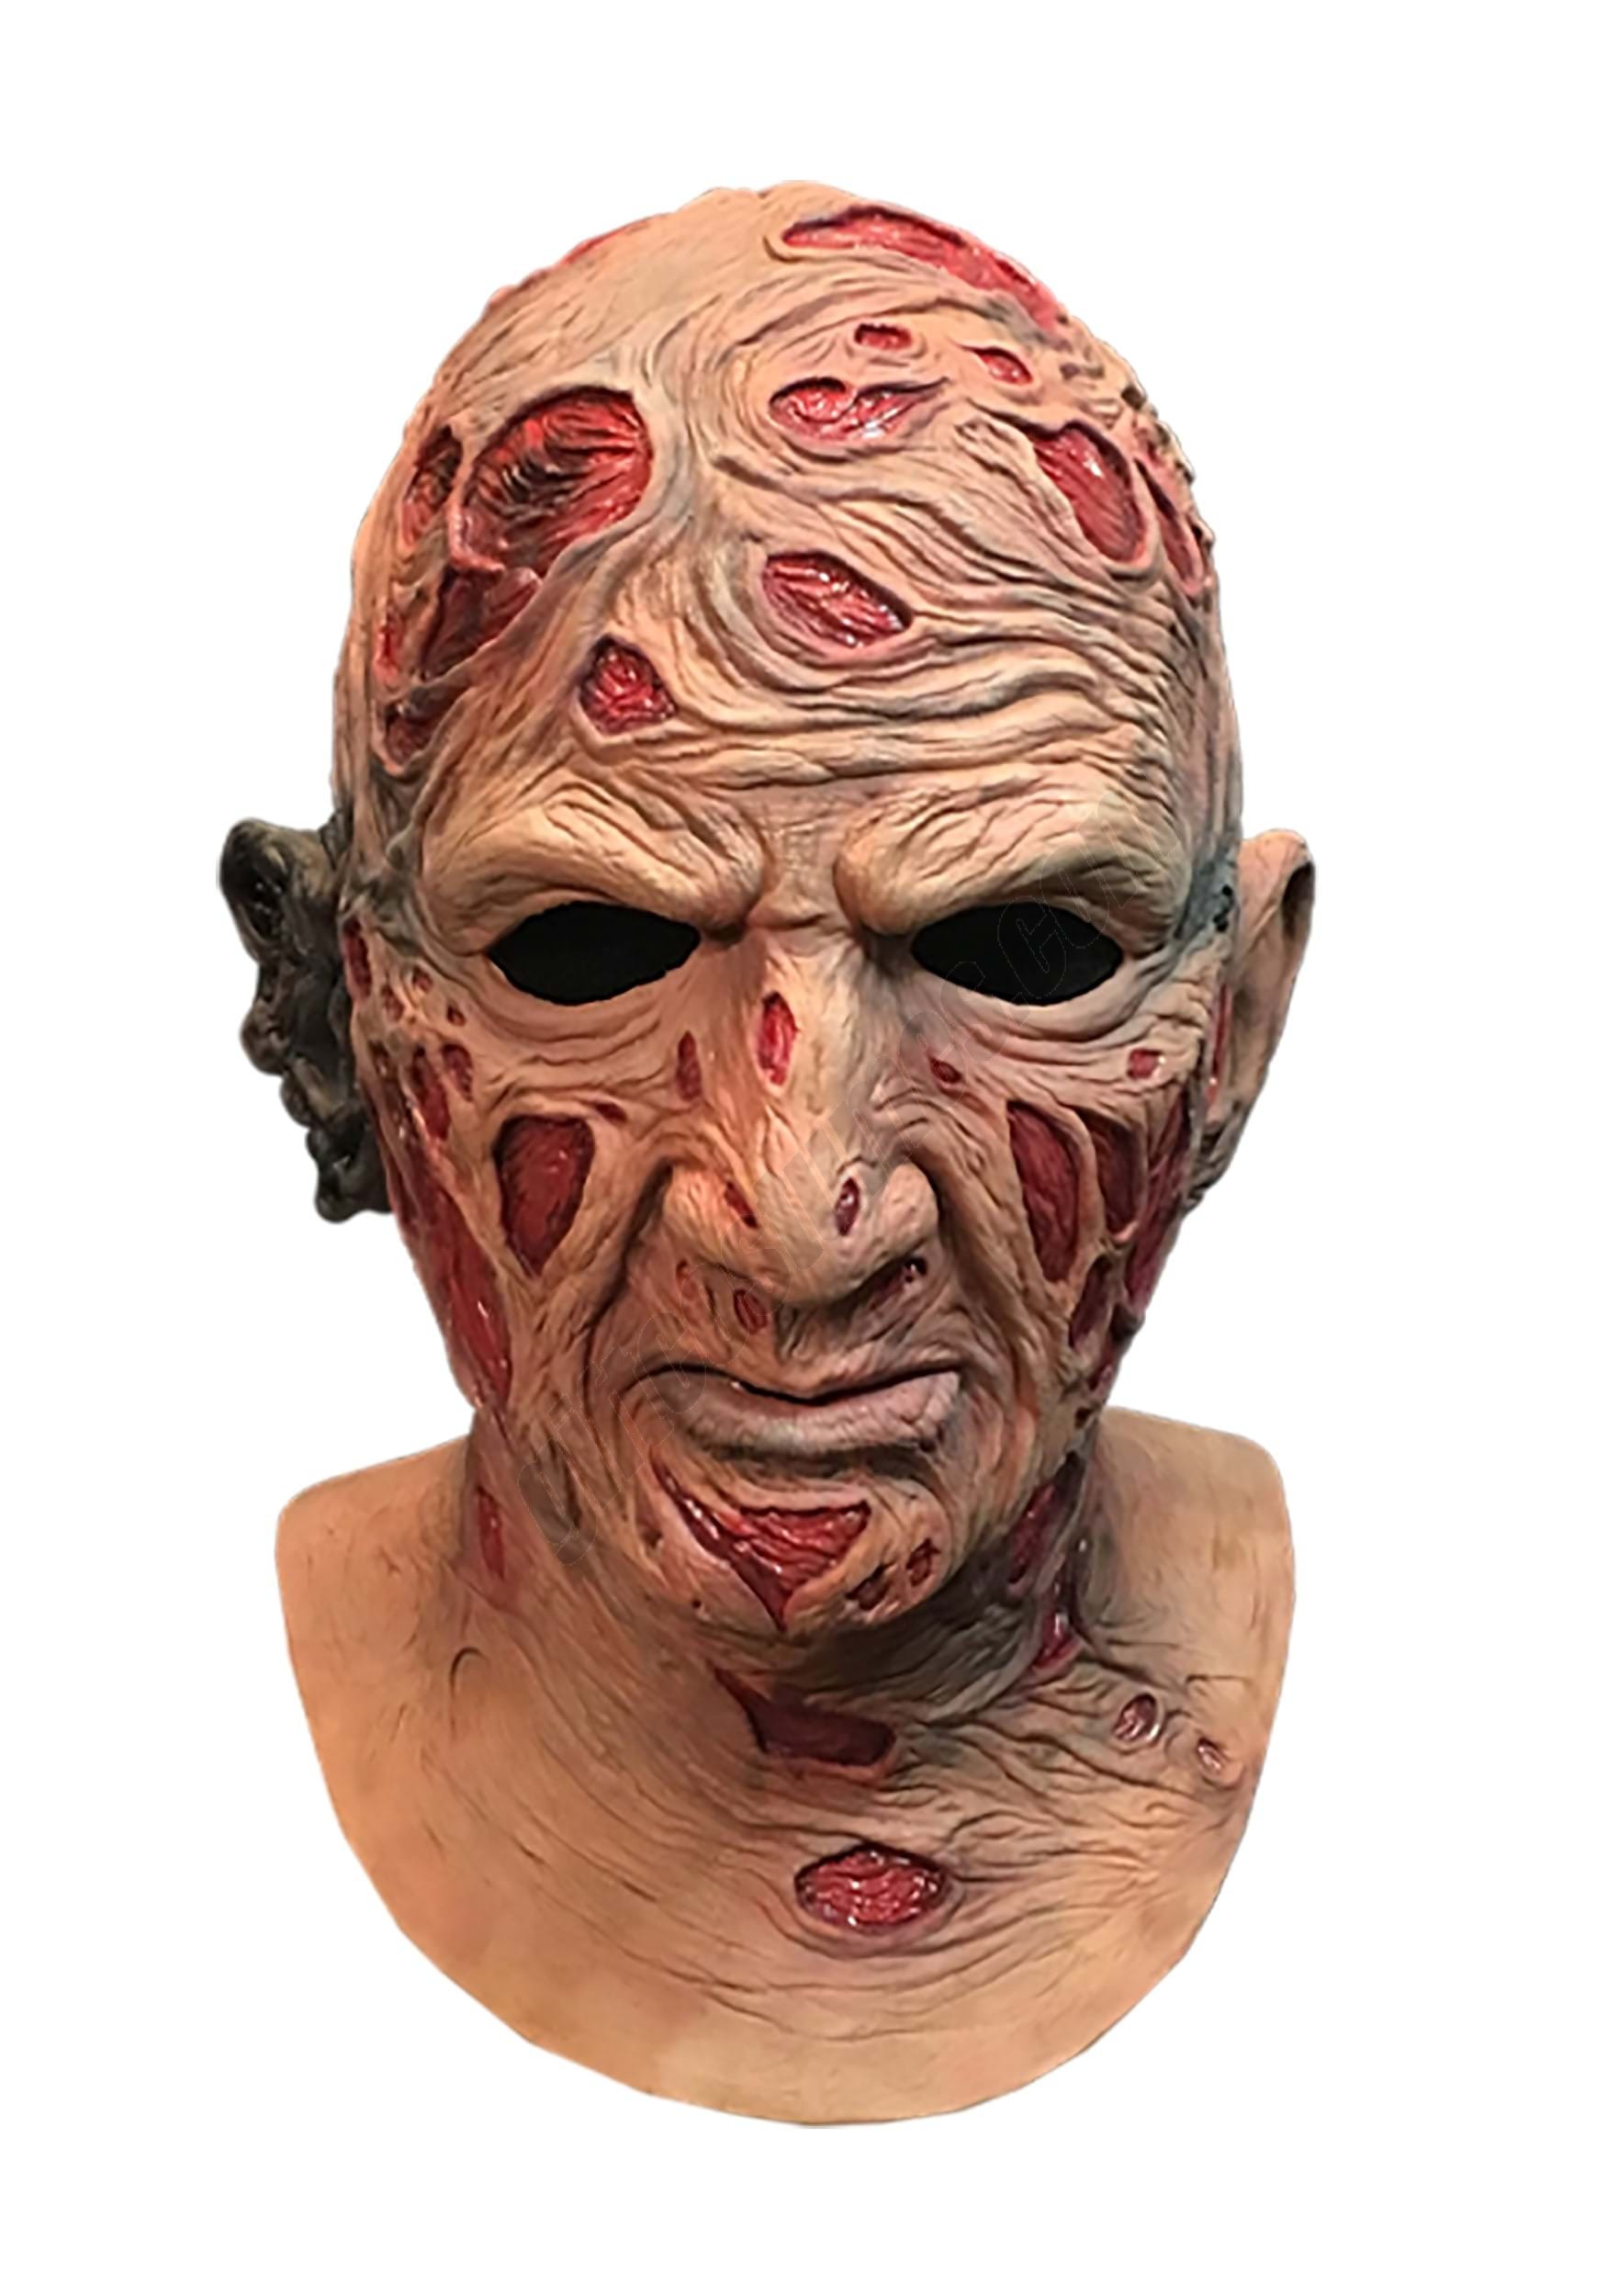 Springwood Slasher Mask from A Nightmare on Elm Street  Promotions - Springwood Slasher Mask from A Nightmare on Elm Street  Promotions